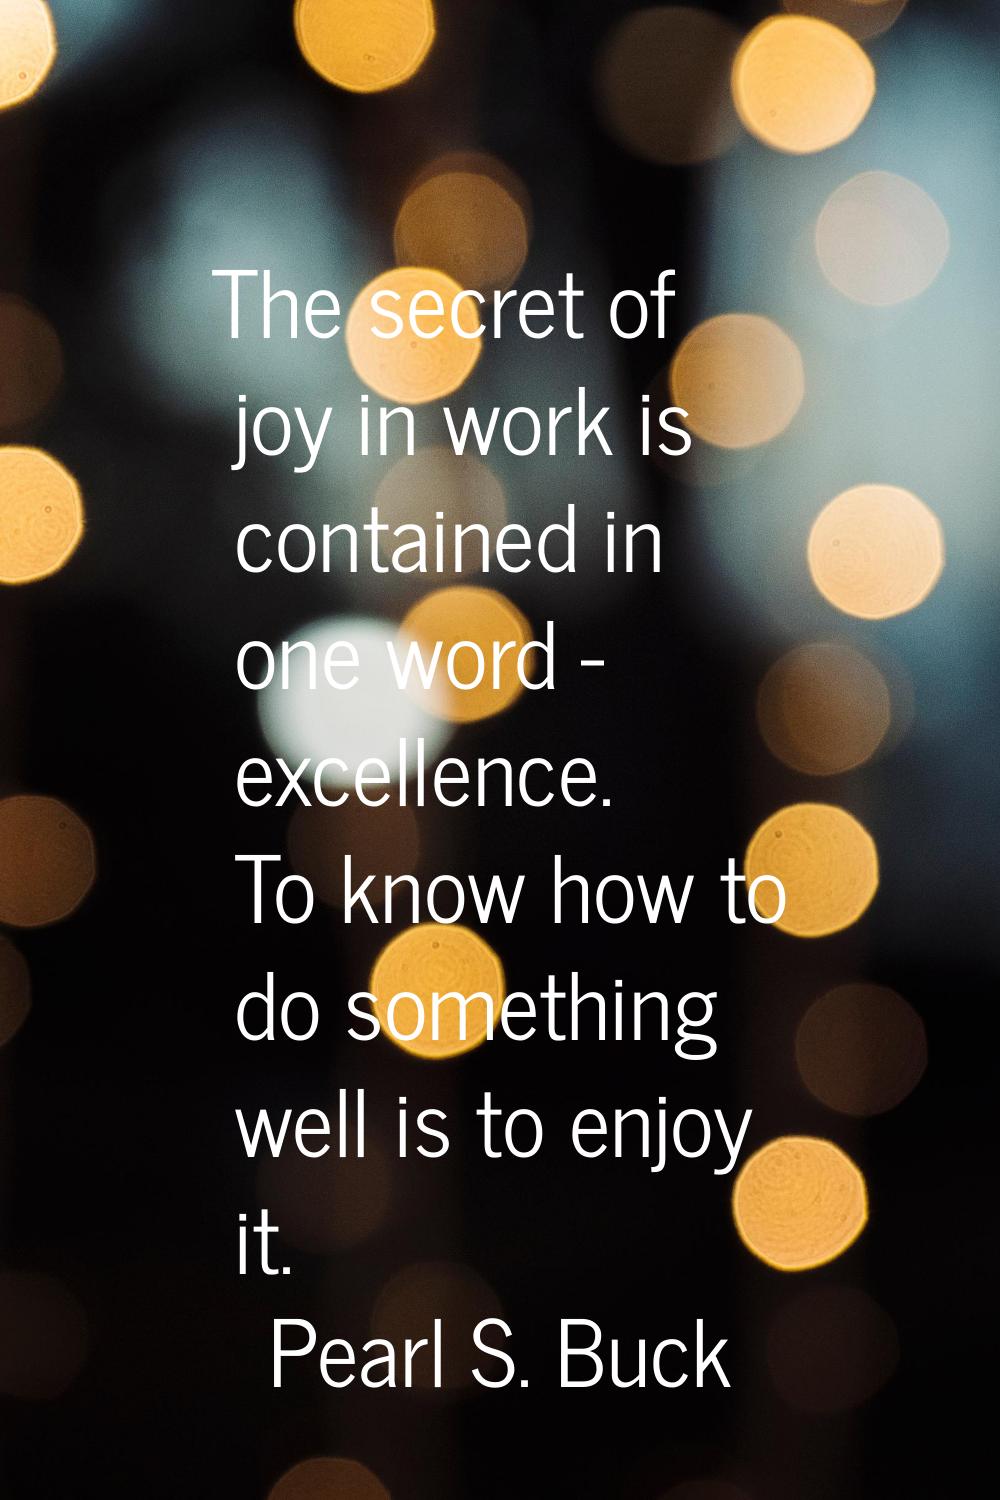 The secret of joy in work is contained in one word - excellence. To know how to do something well i